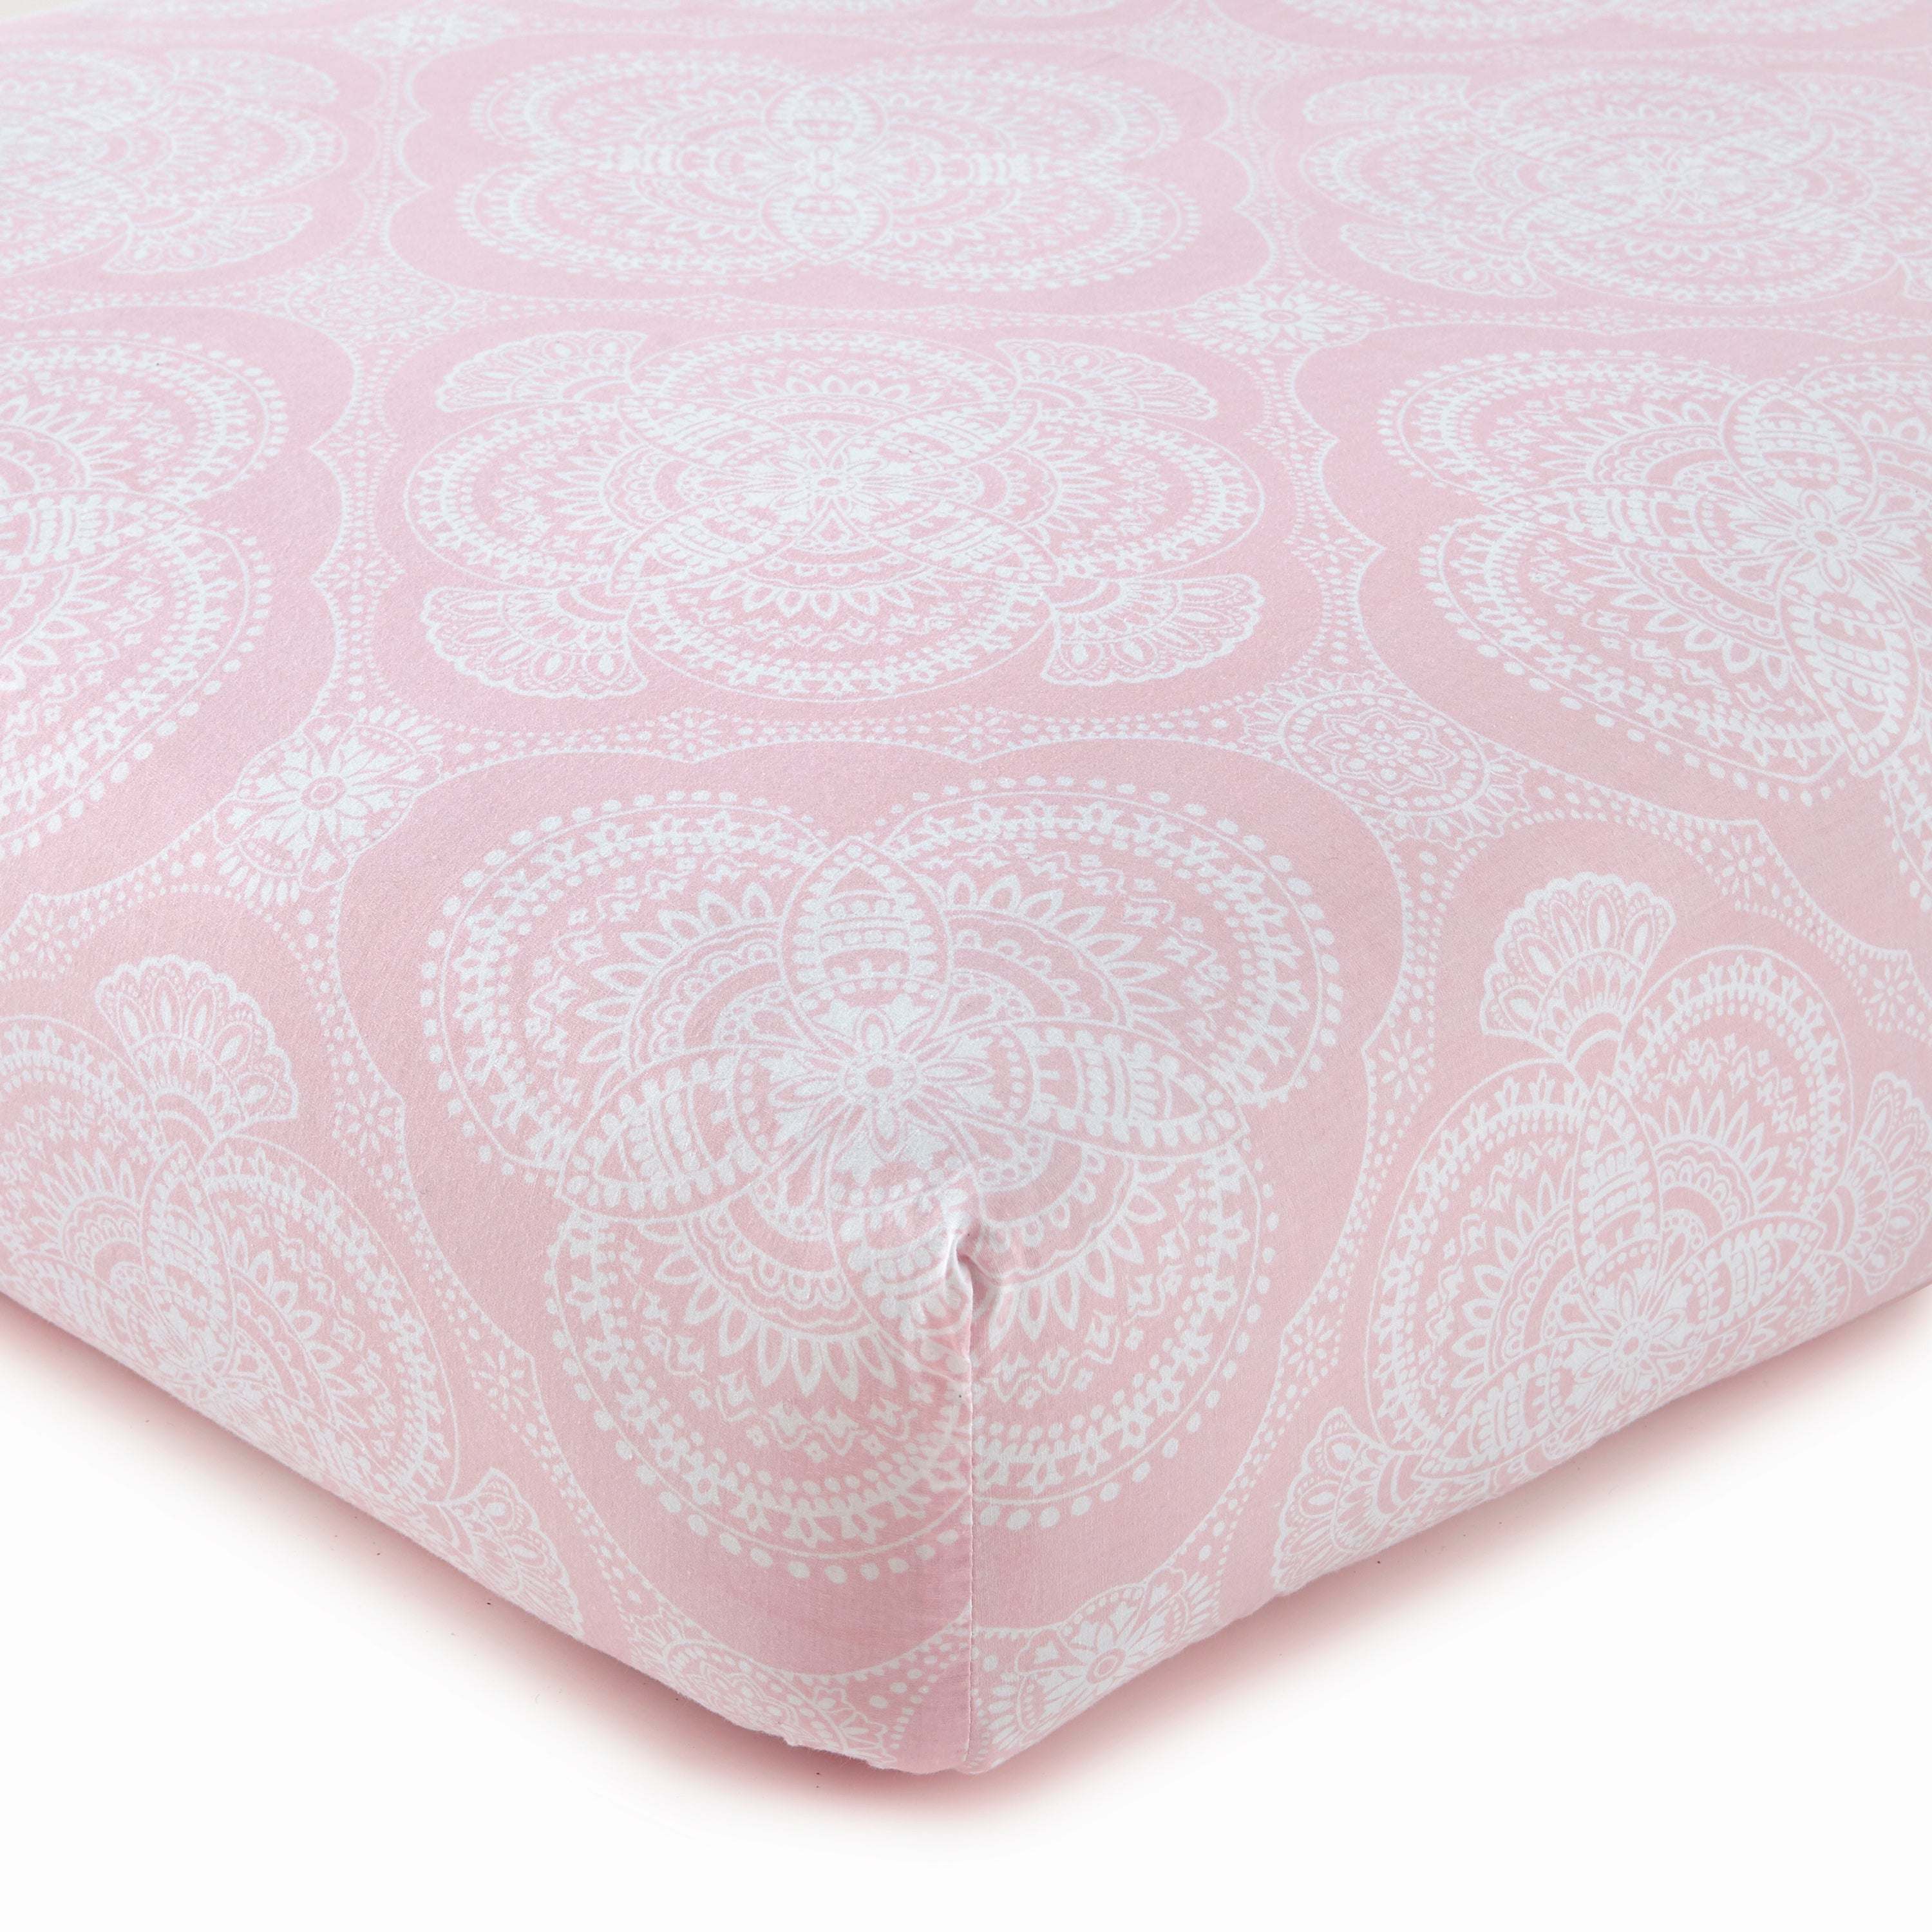 Willow Medallion Cotton Crib Fitted Sheet - Pink